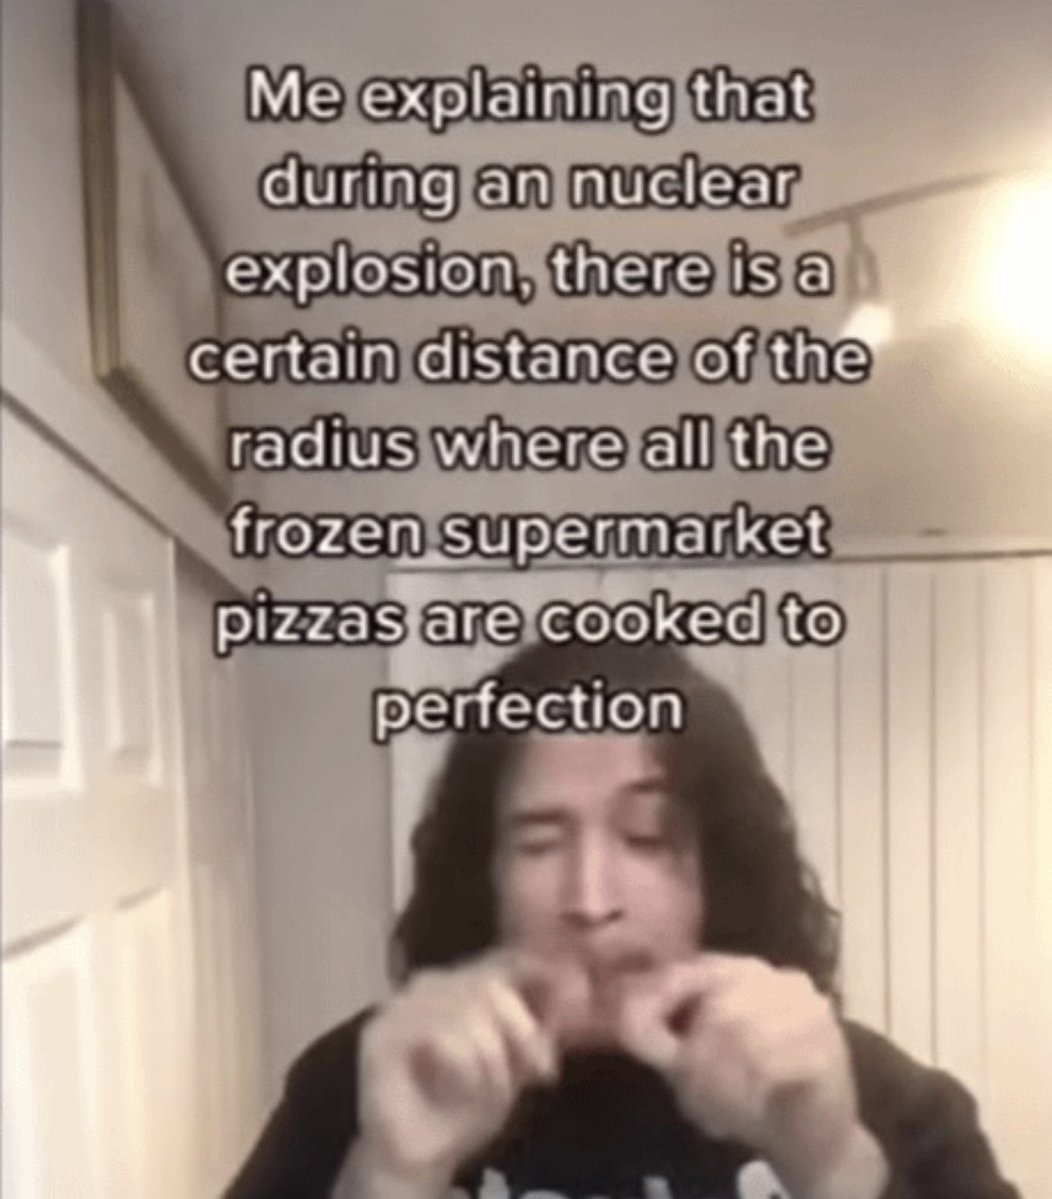 wild tiktok screenshots - photo caption - Me explaining that during an nuclear explosion, there is a certain distance of the radius where all the frozen supermarket pizzas are cooked to perfection